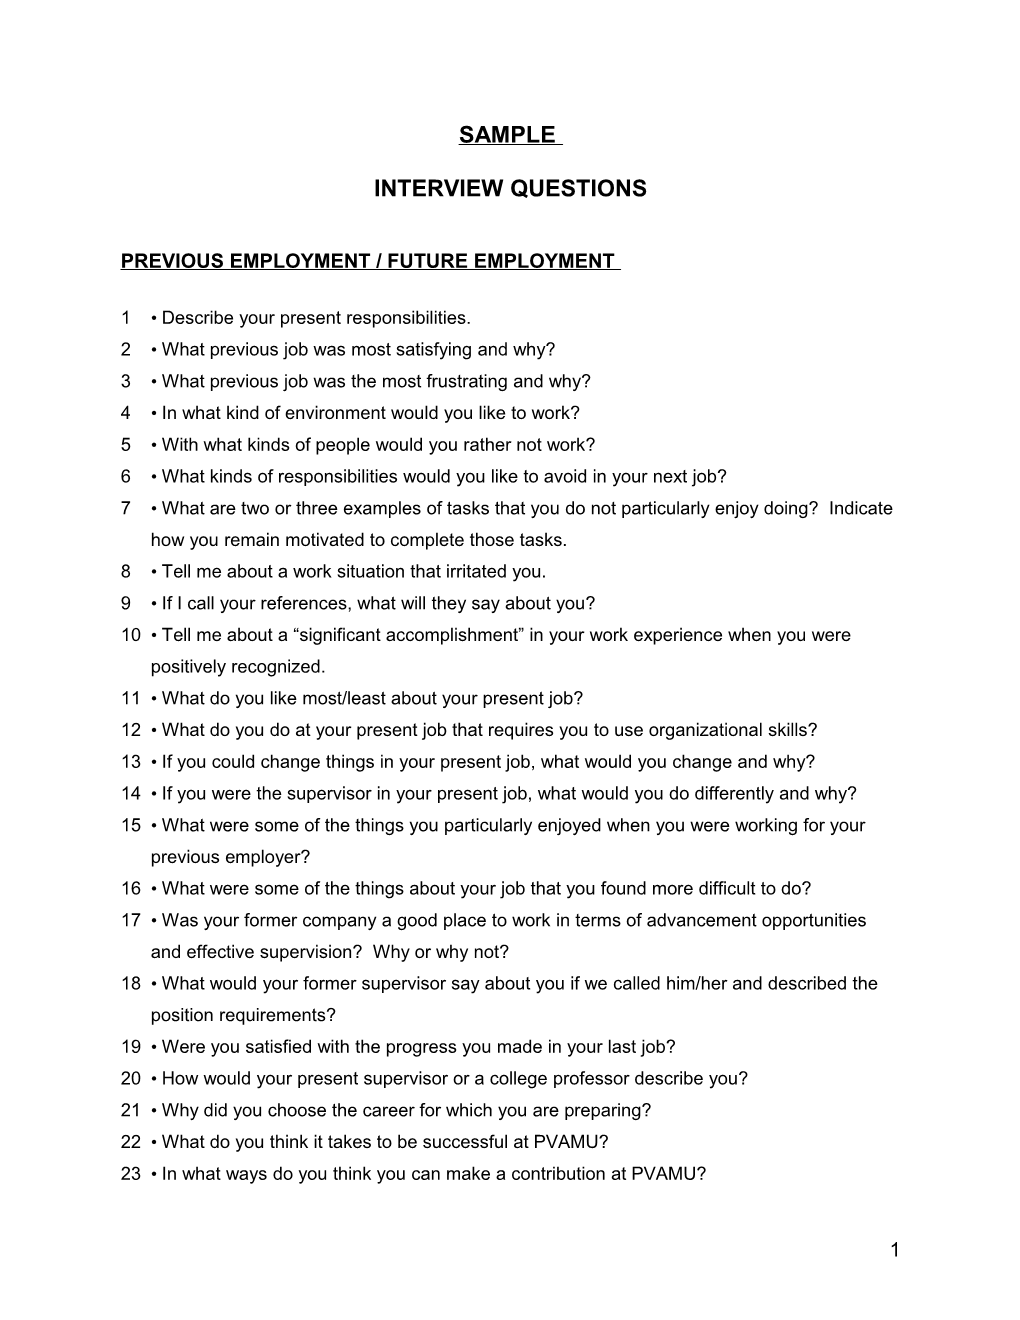 Sample Interview Questions s1